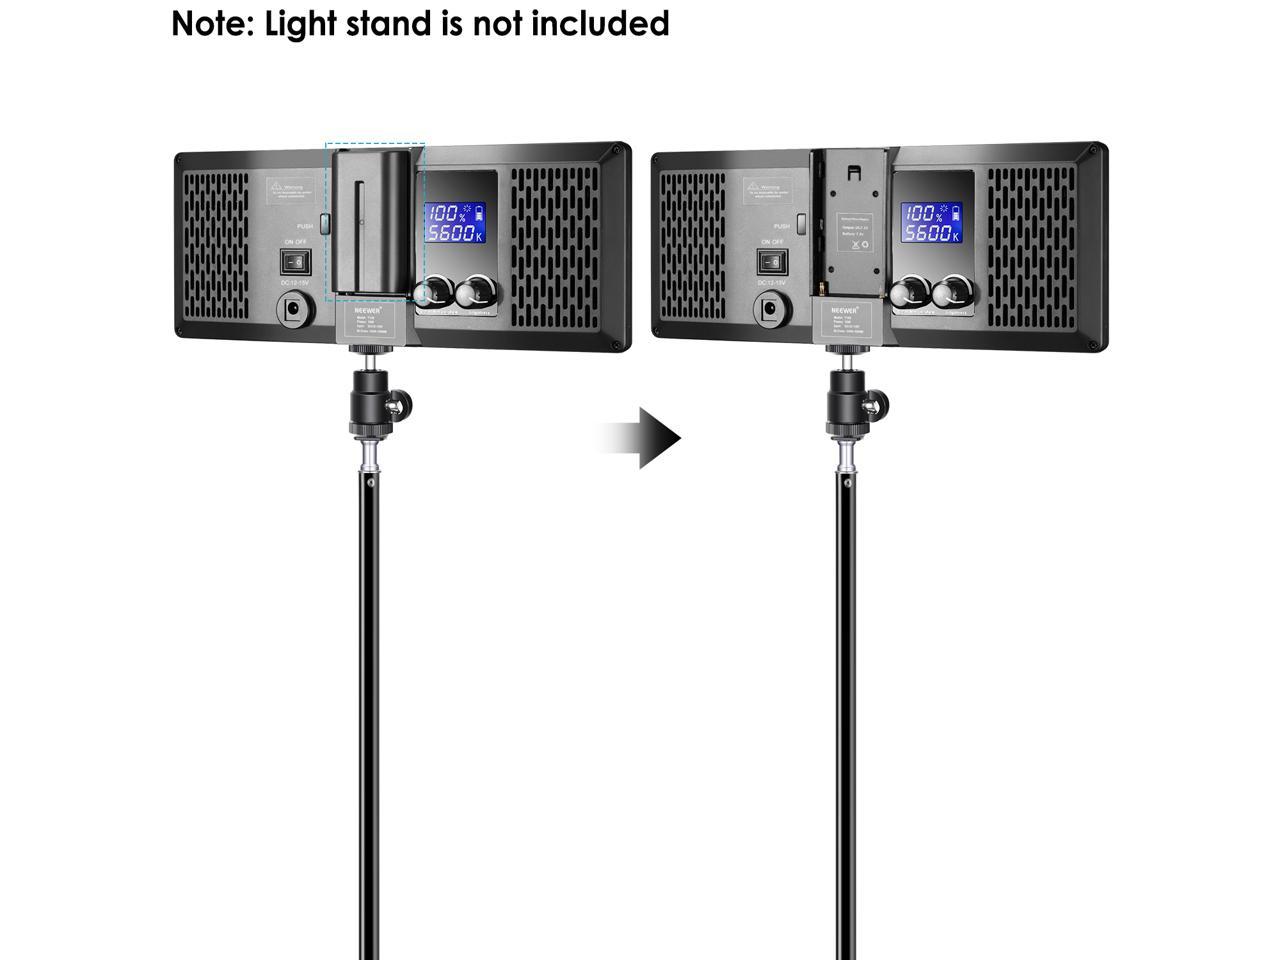 Neewer 2 Packs Super Slim LED Video Light with Light Stand Photography